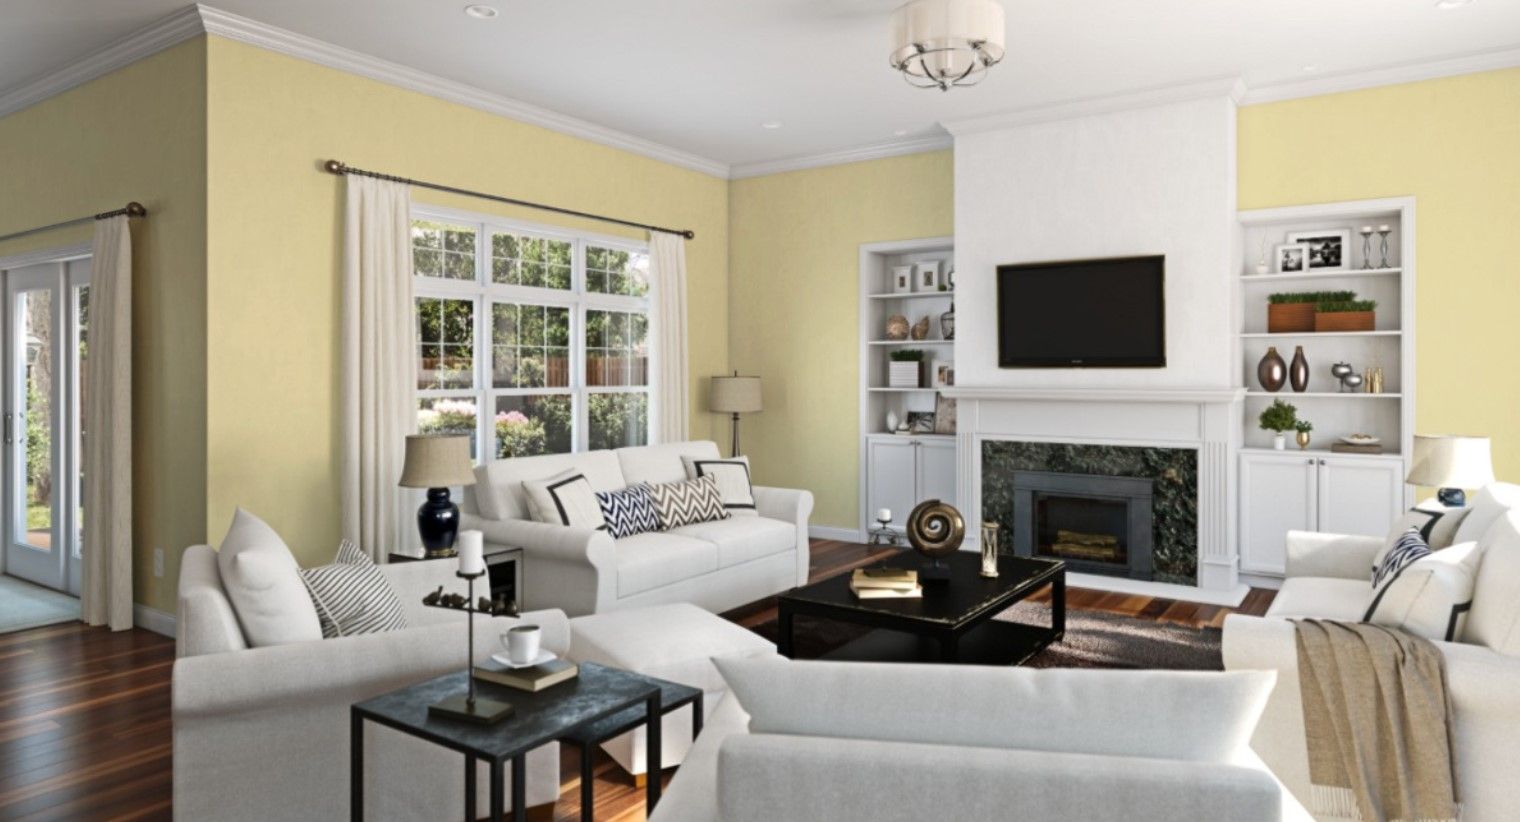 Sherwin Williams Moonraker pairs nicely with white neutrals and shades of gold. (2)